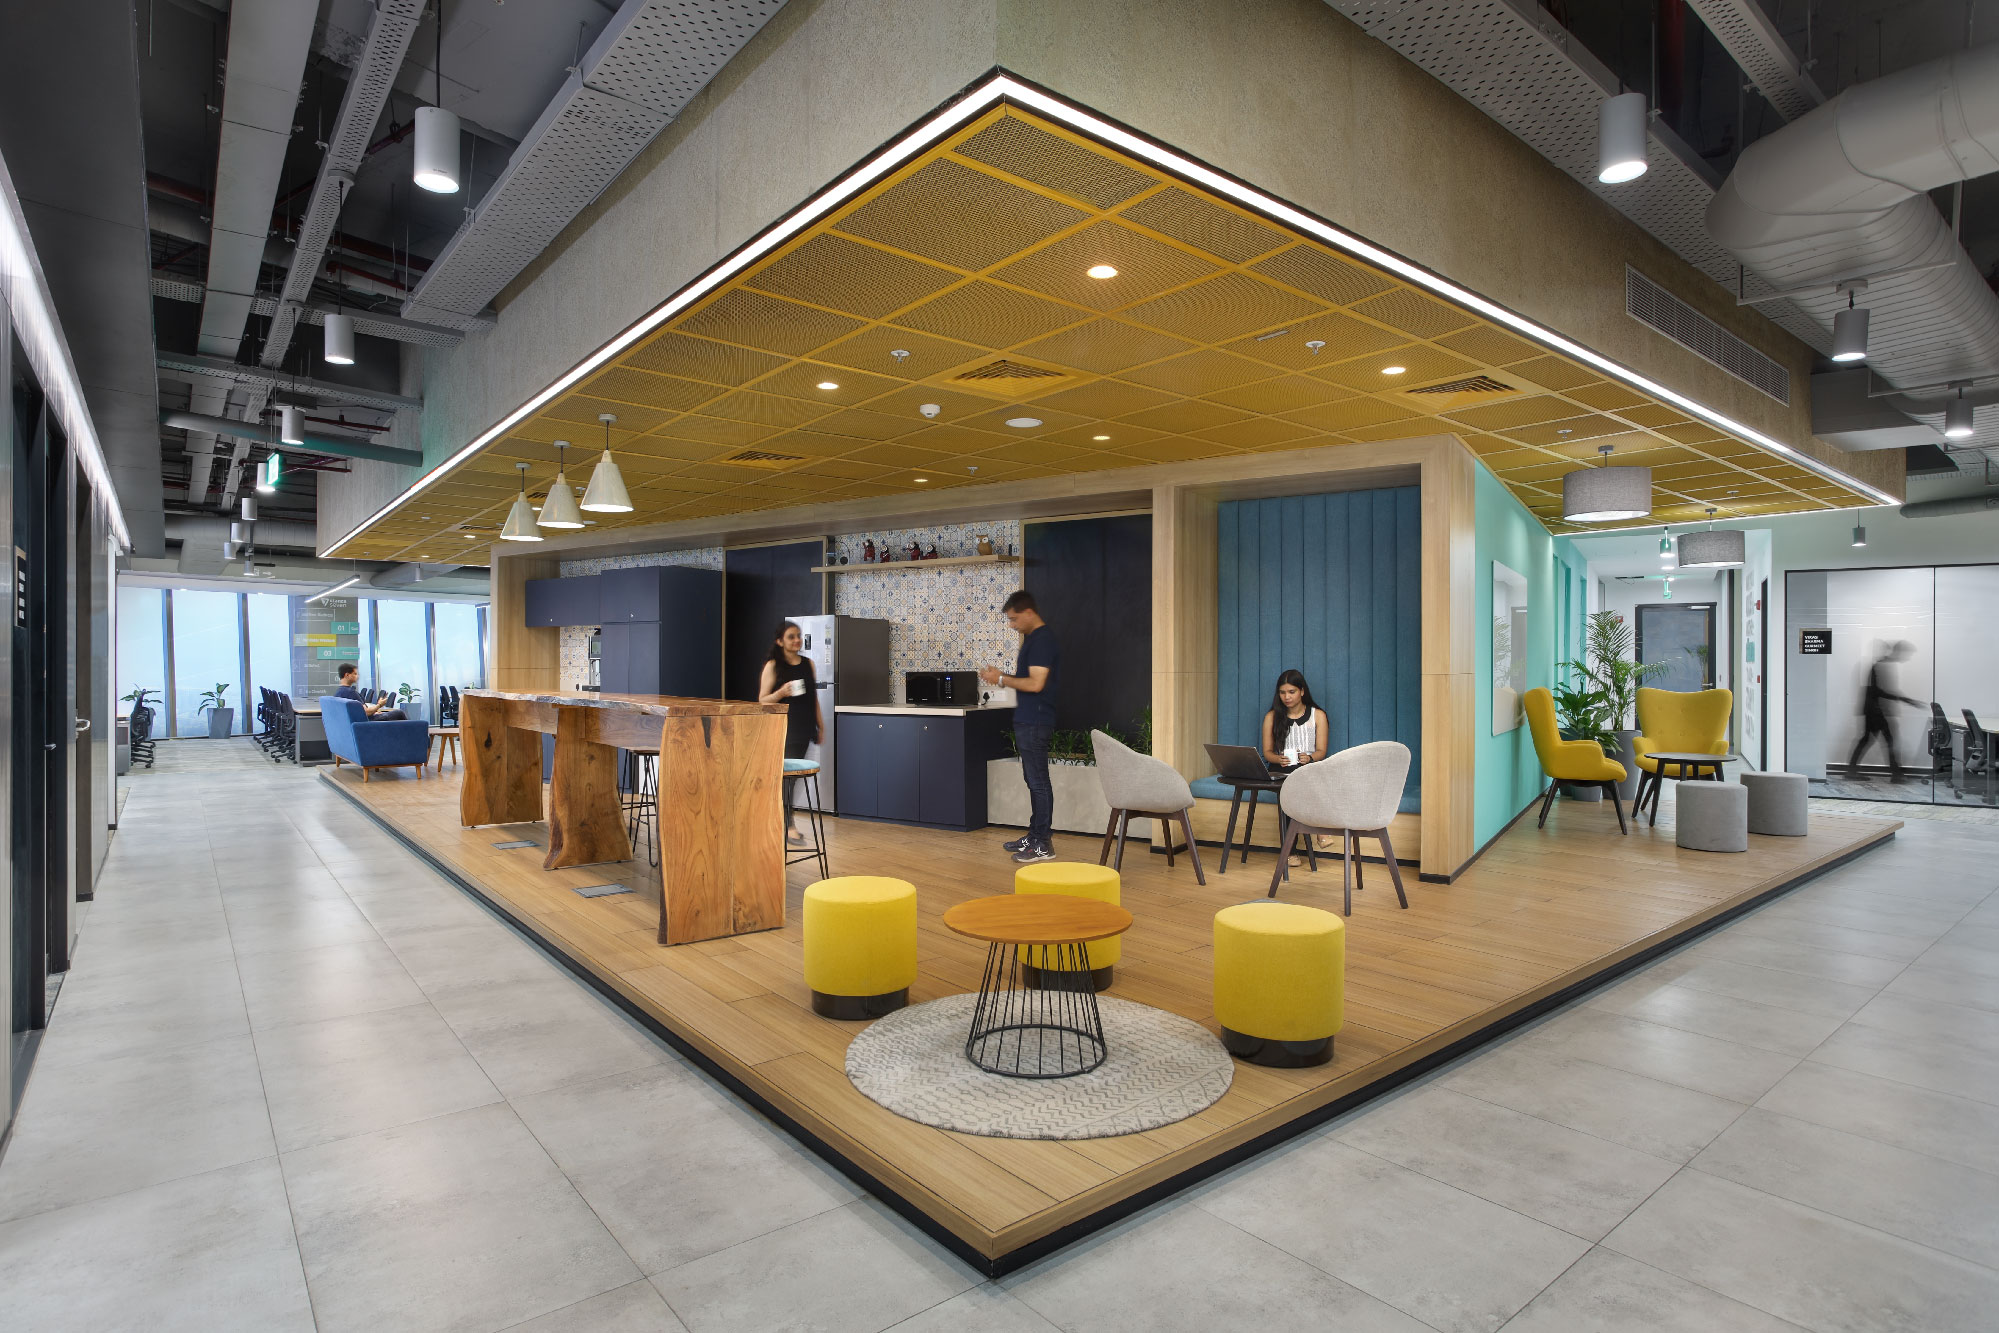 designed to foster a sense of belonging and connection among employees